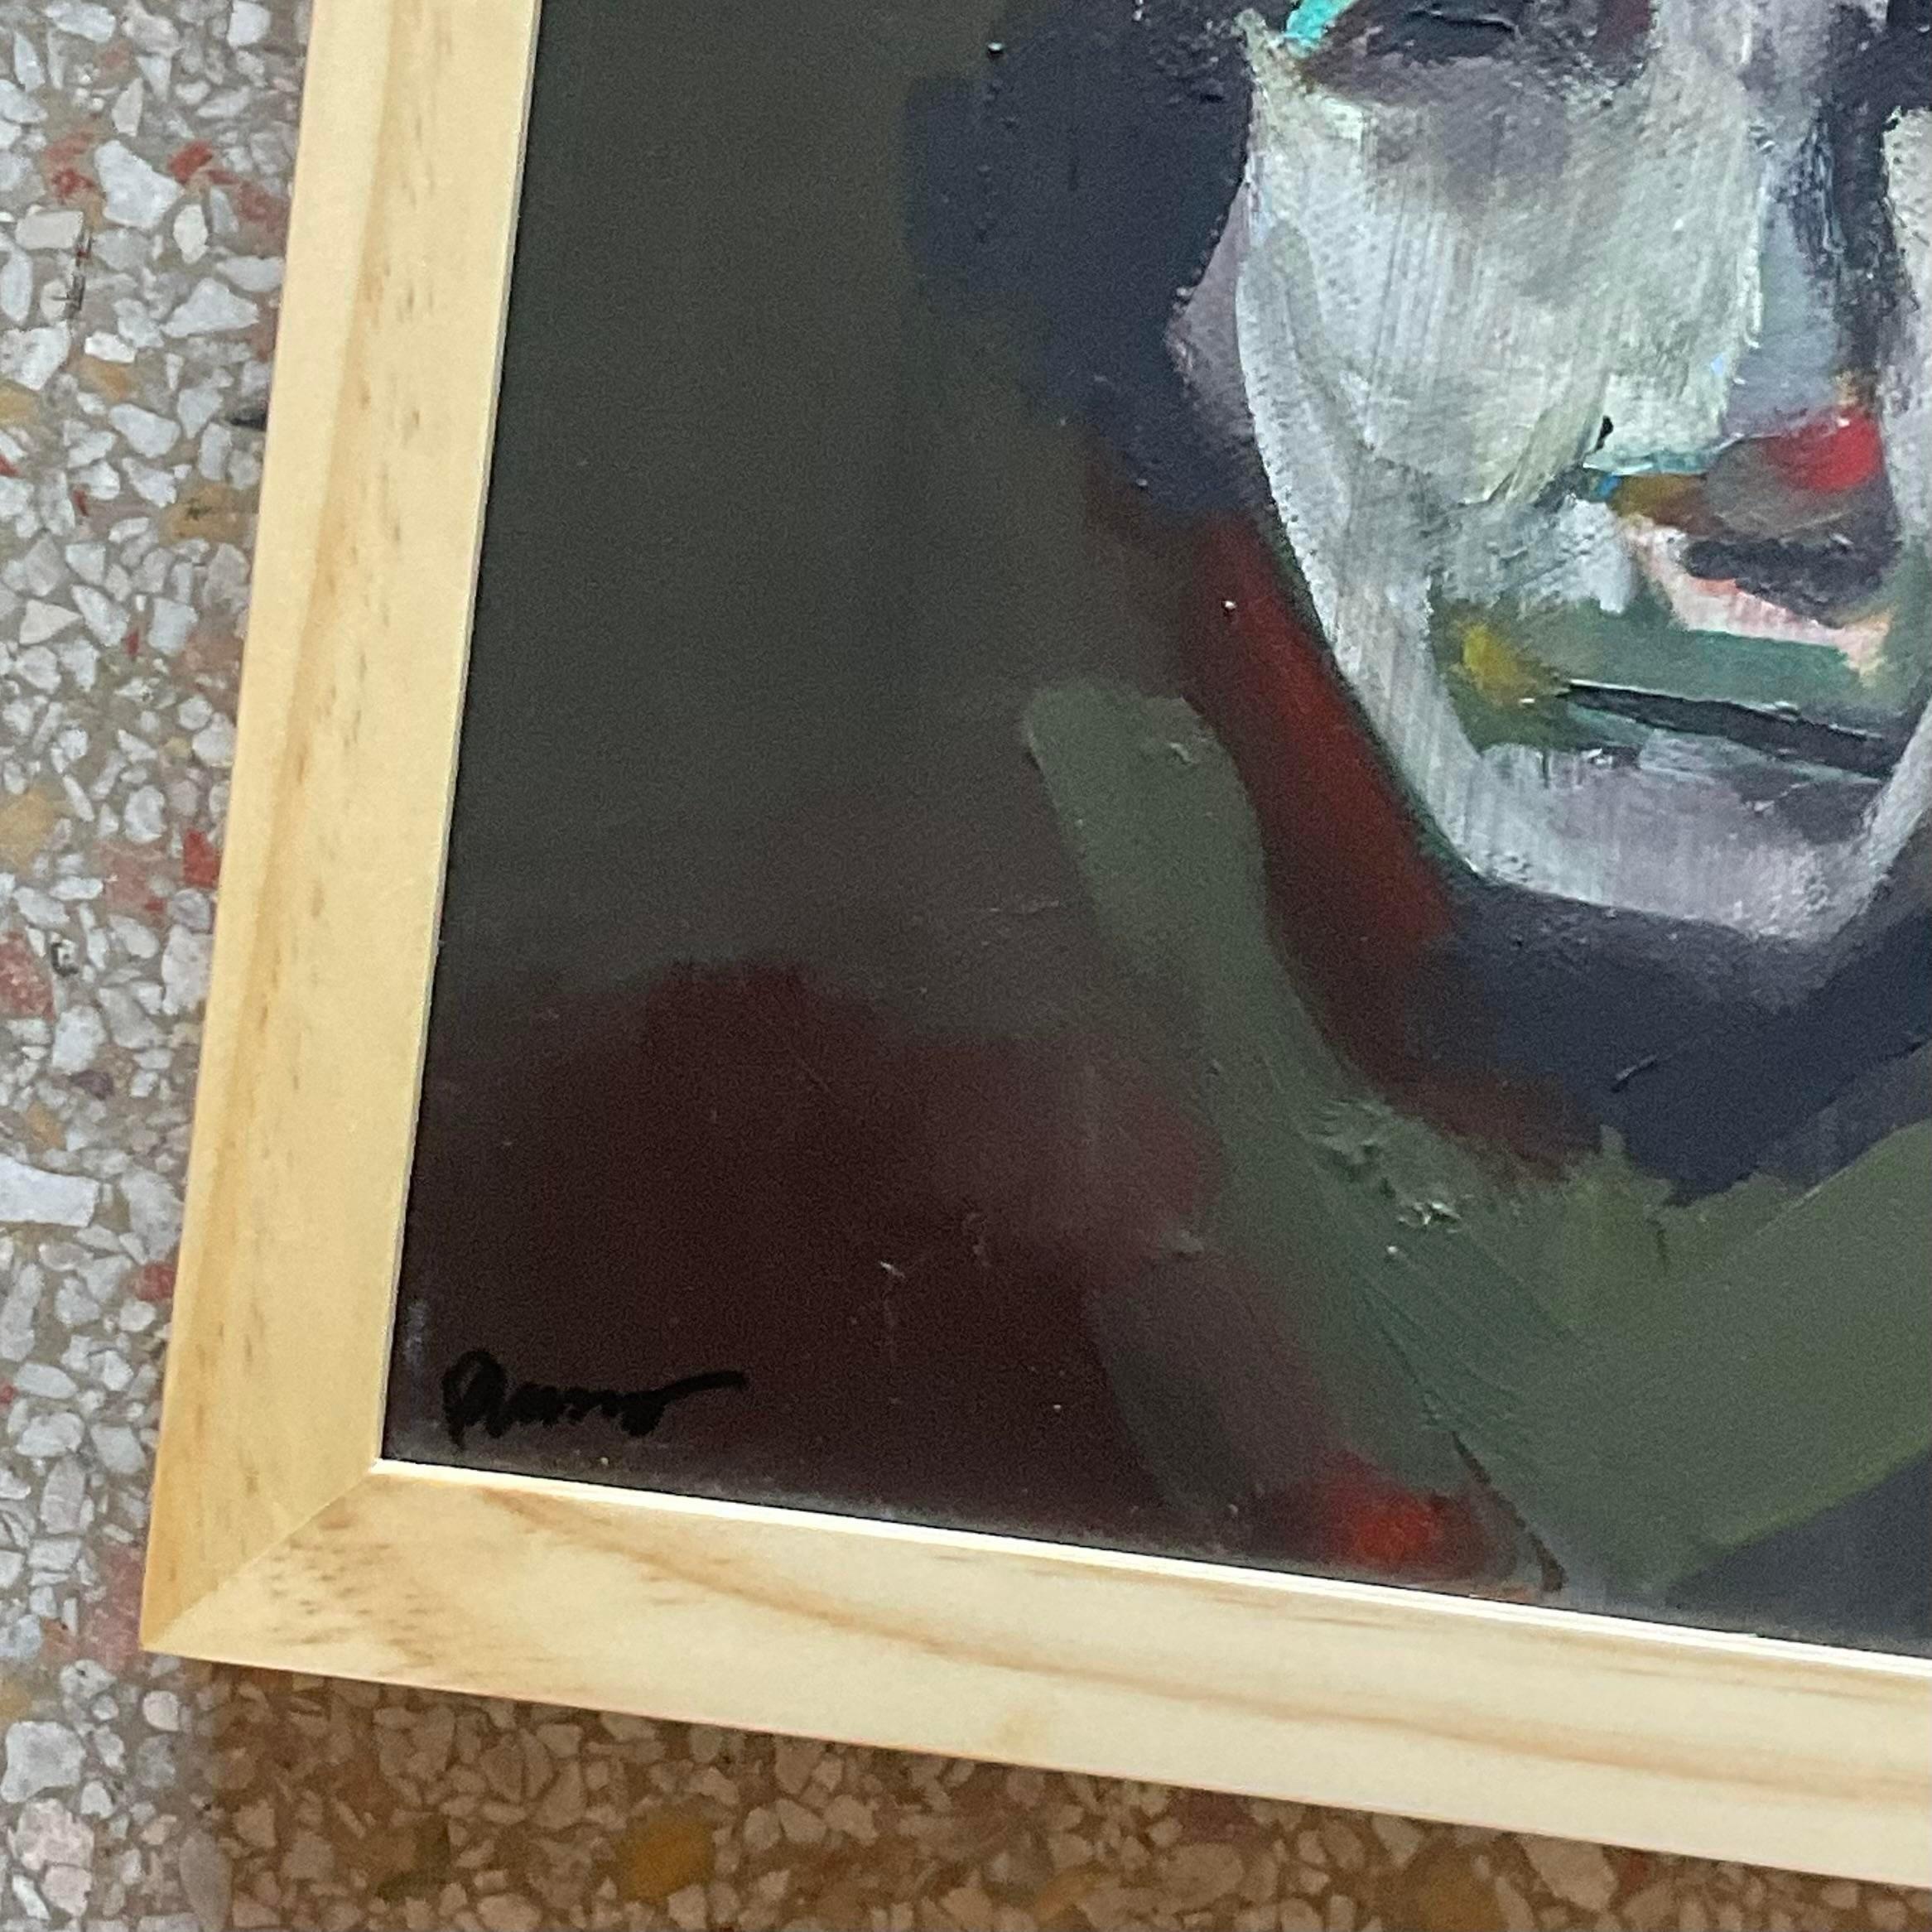 A fantastic vintage Boho original oil painting. A chic Abstract portrait in deep rich colors. Signed by the artist. Acquired from a Palm Beach estate.